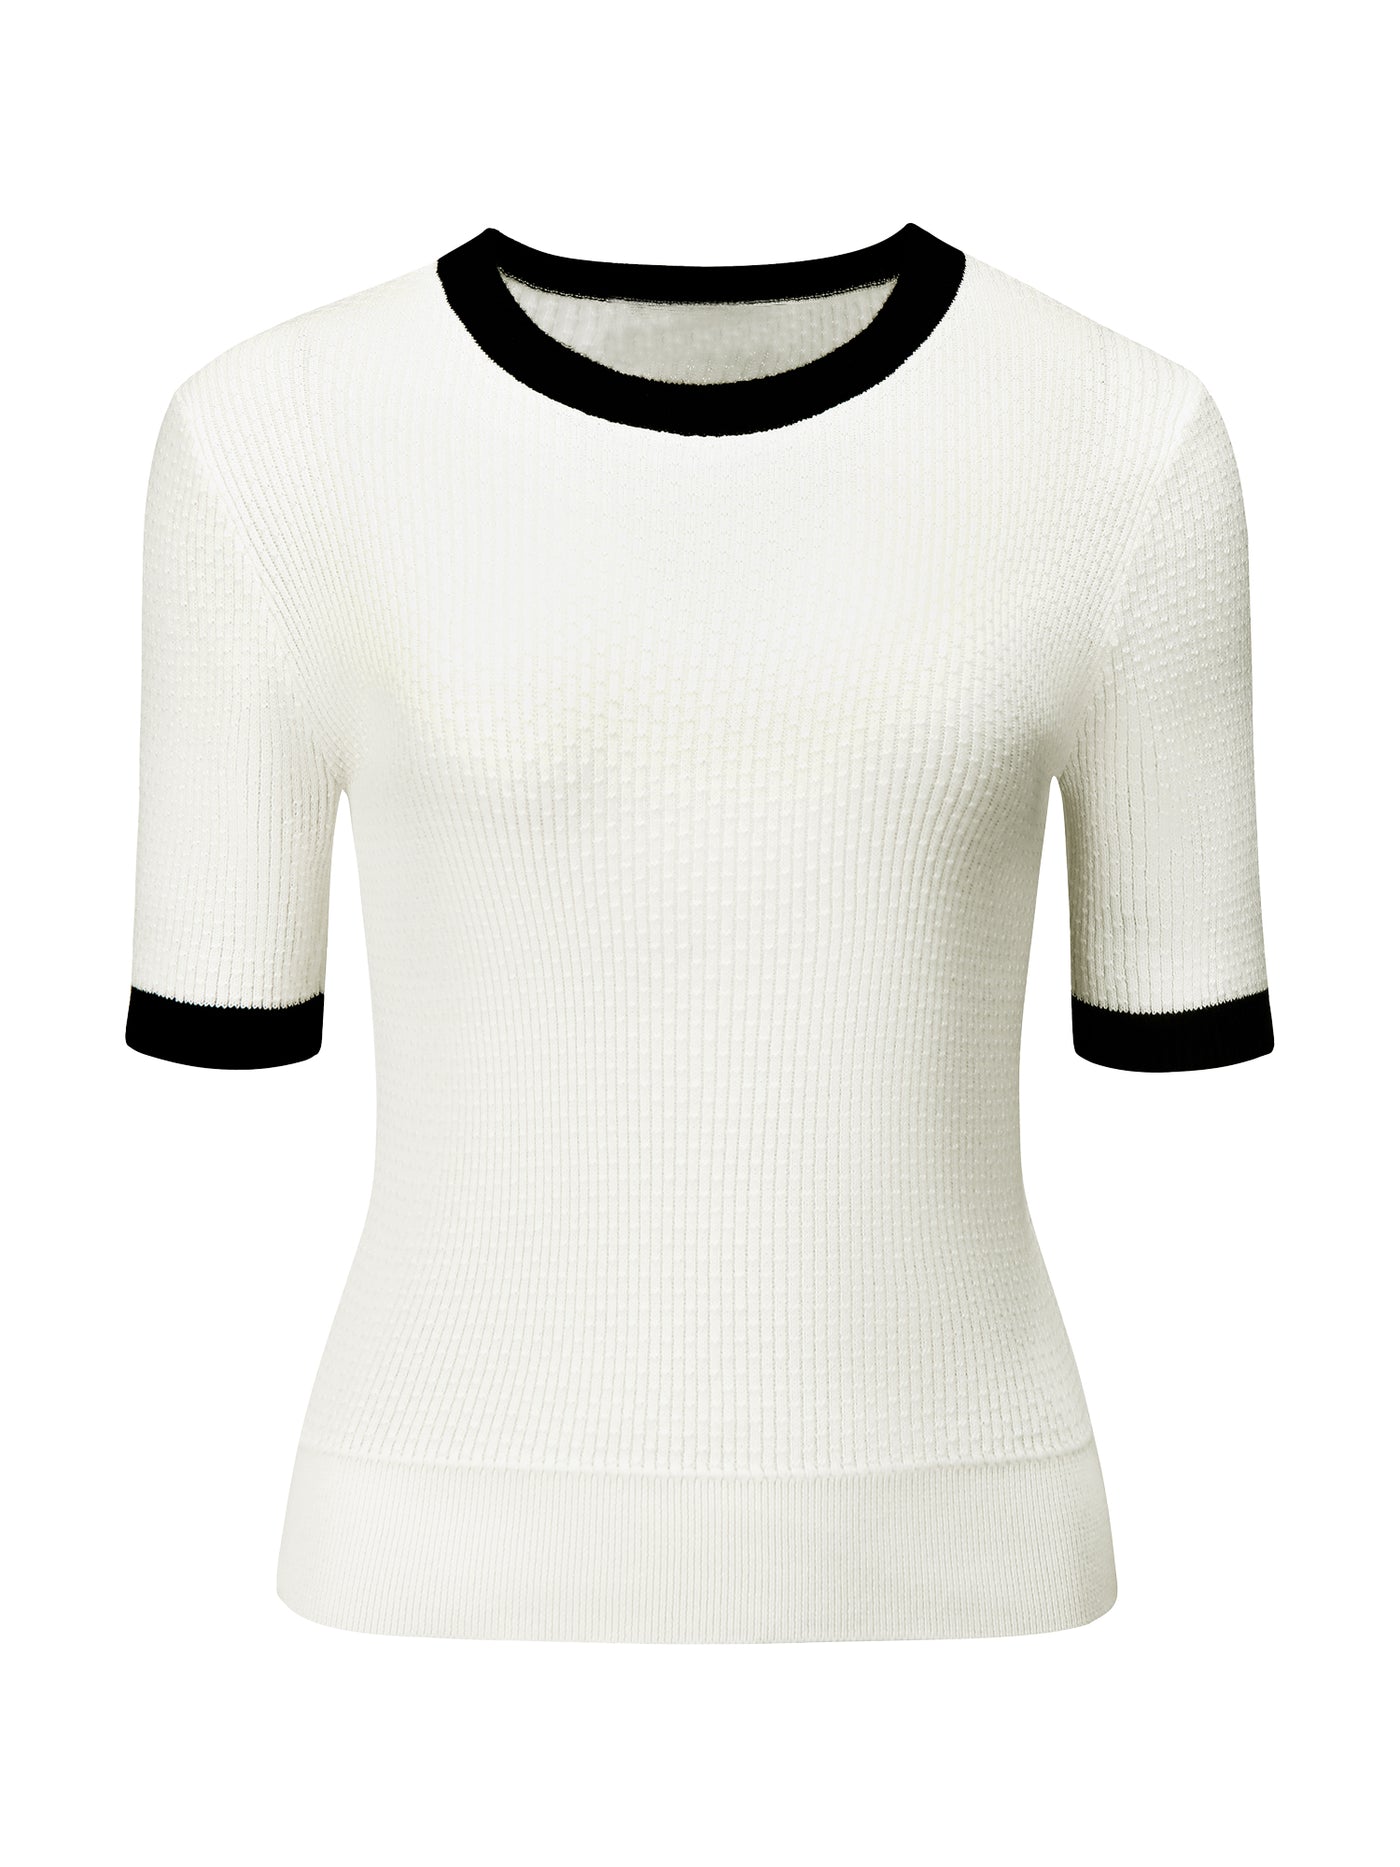 Bublédon Women's Fitted Knit Top Crew Neck Contrast Color Short Sleeve Pullover Tops